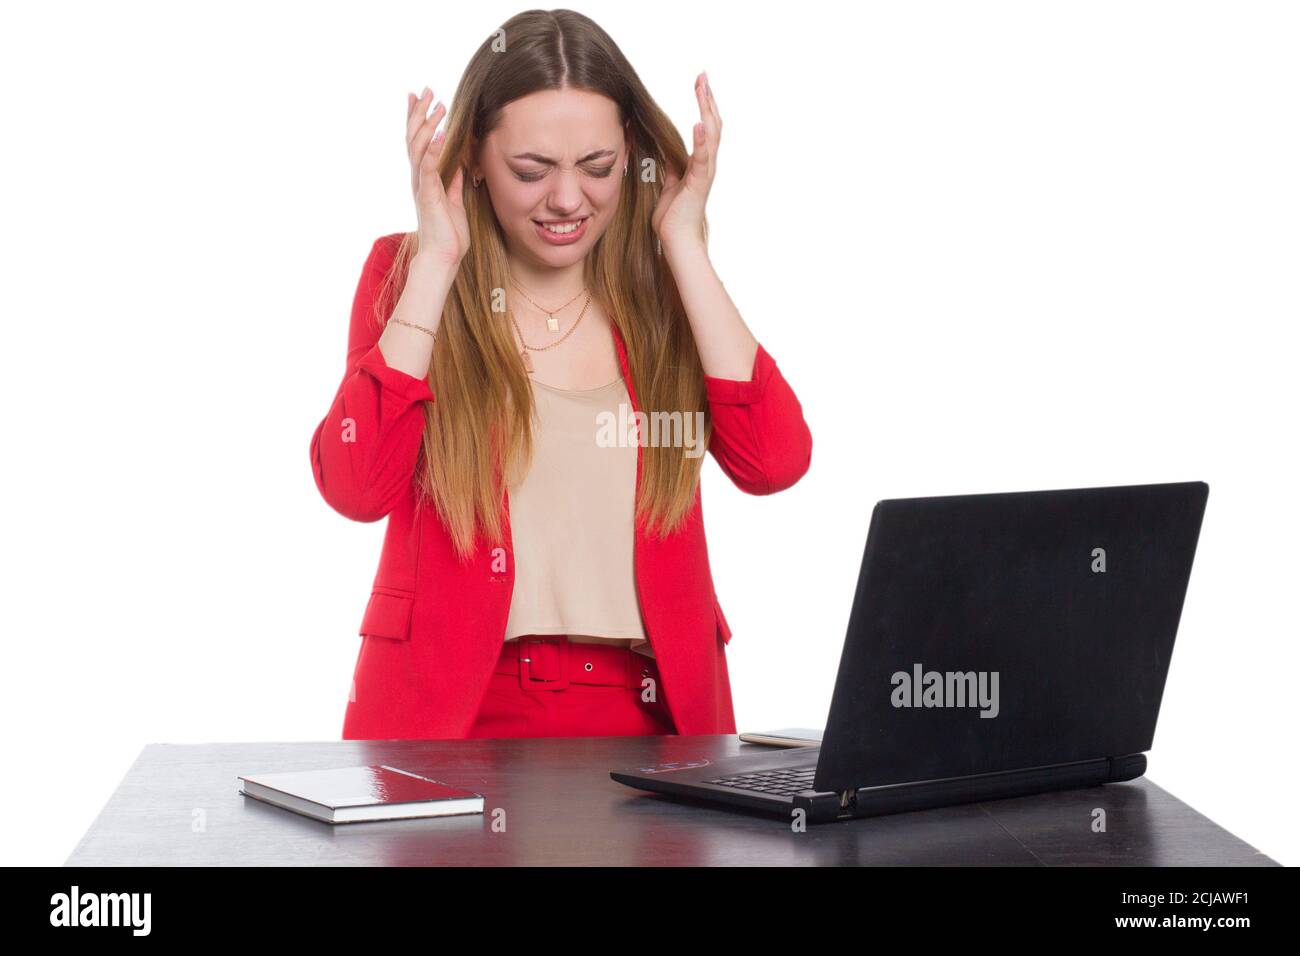 A young business office woman in a red suit a background isolated in white, holding a laptop, and talking on a smartphone Stock Photo